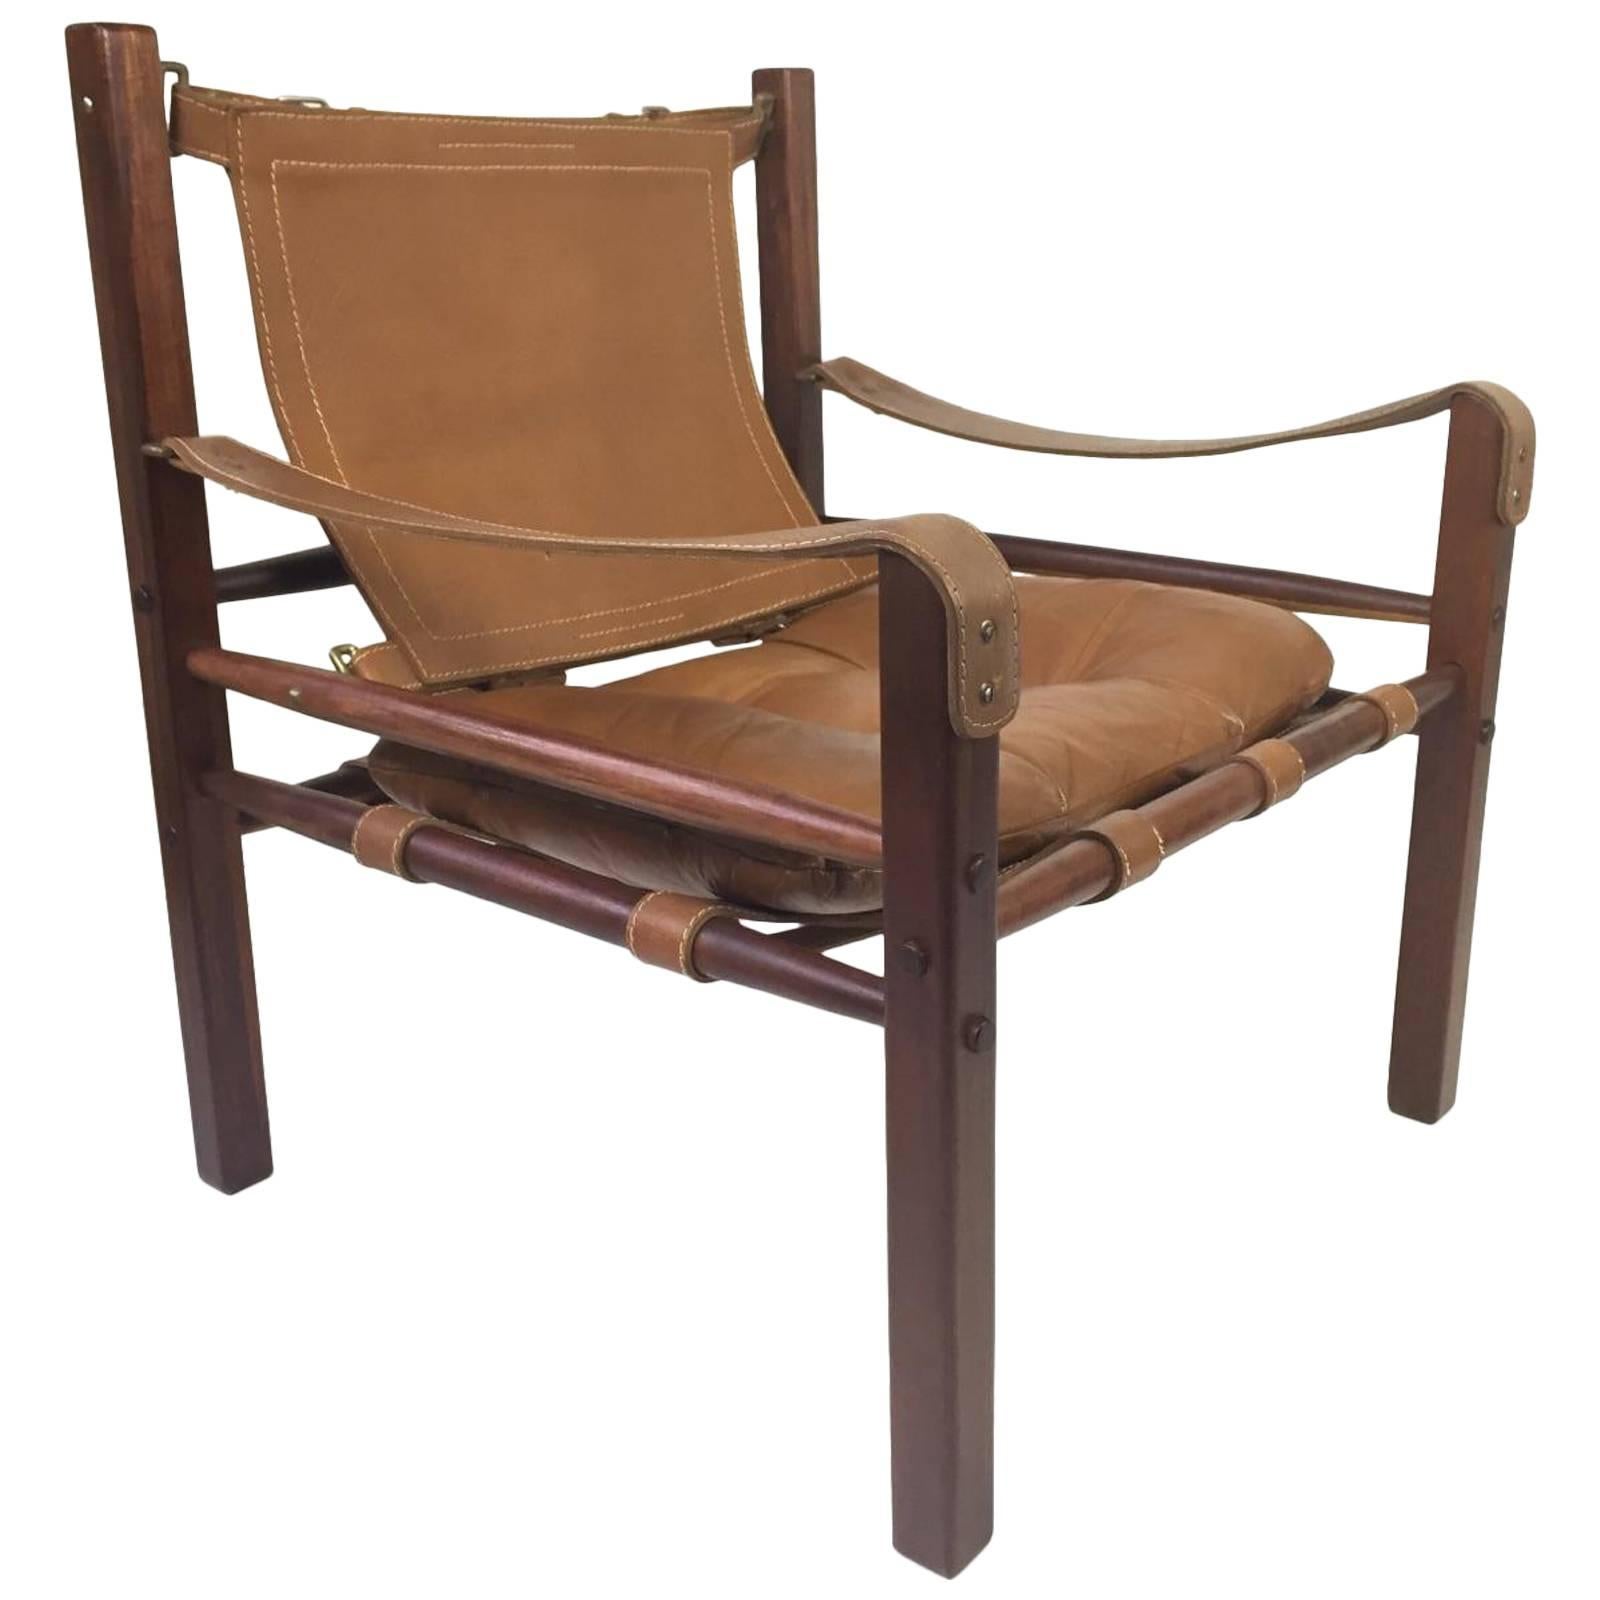  Rosewood and  "Sirocco" Leather Safari Chair by Arne Norell